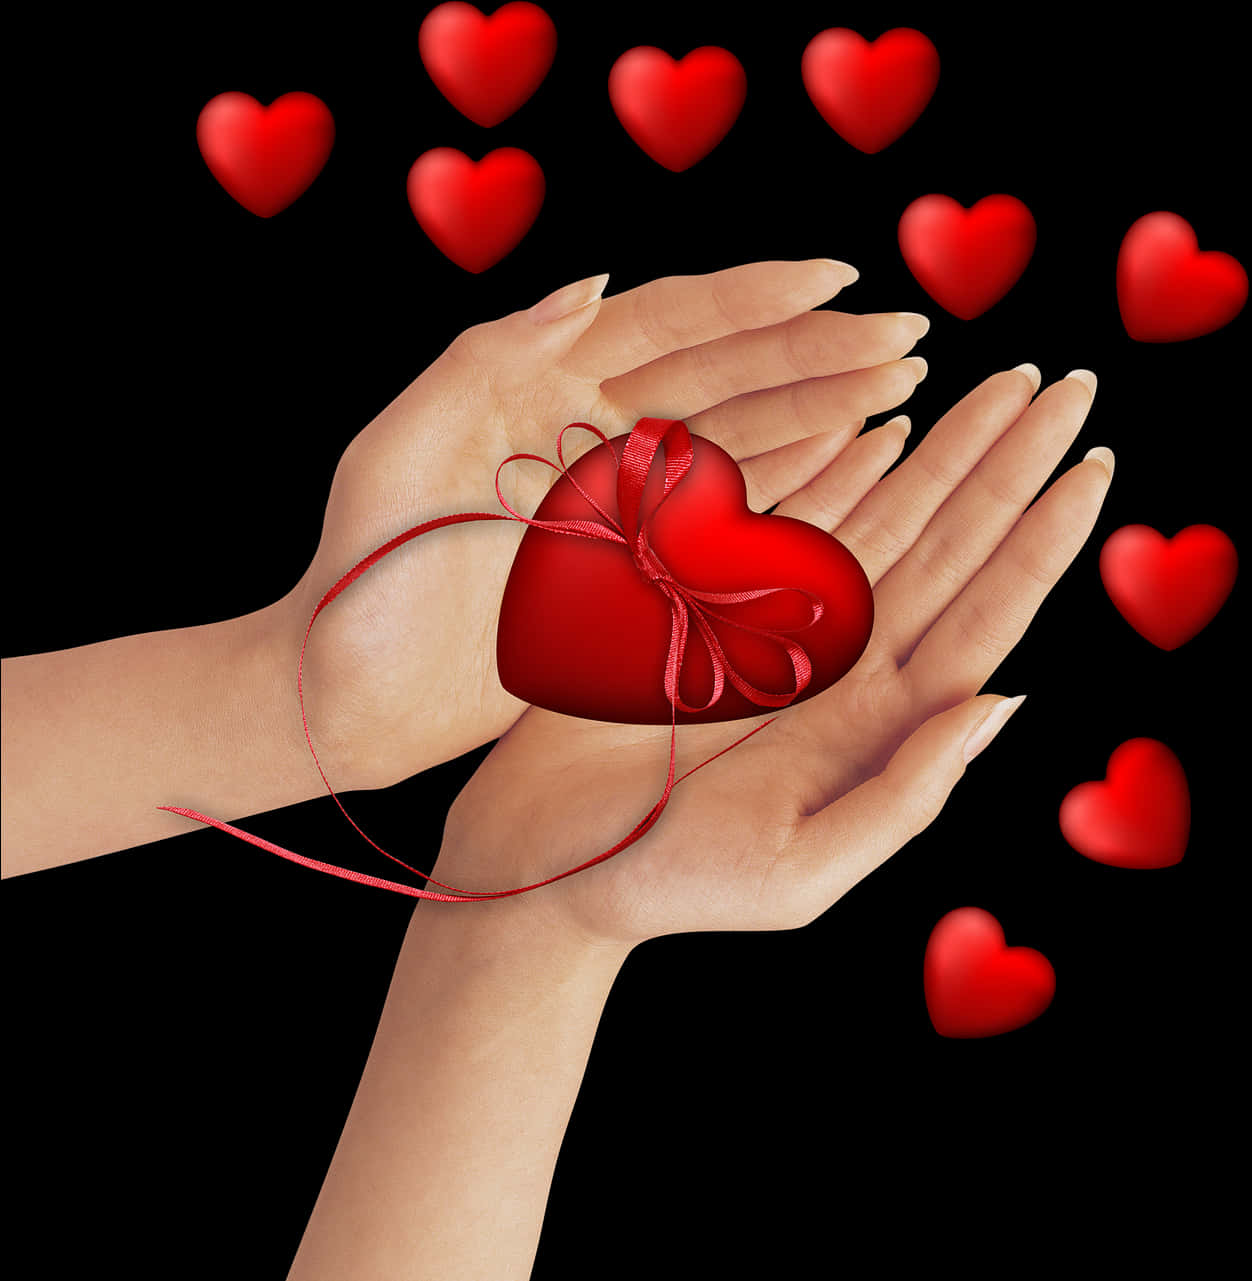 Palm Heart Images With Transparent Background